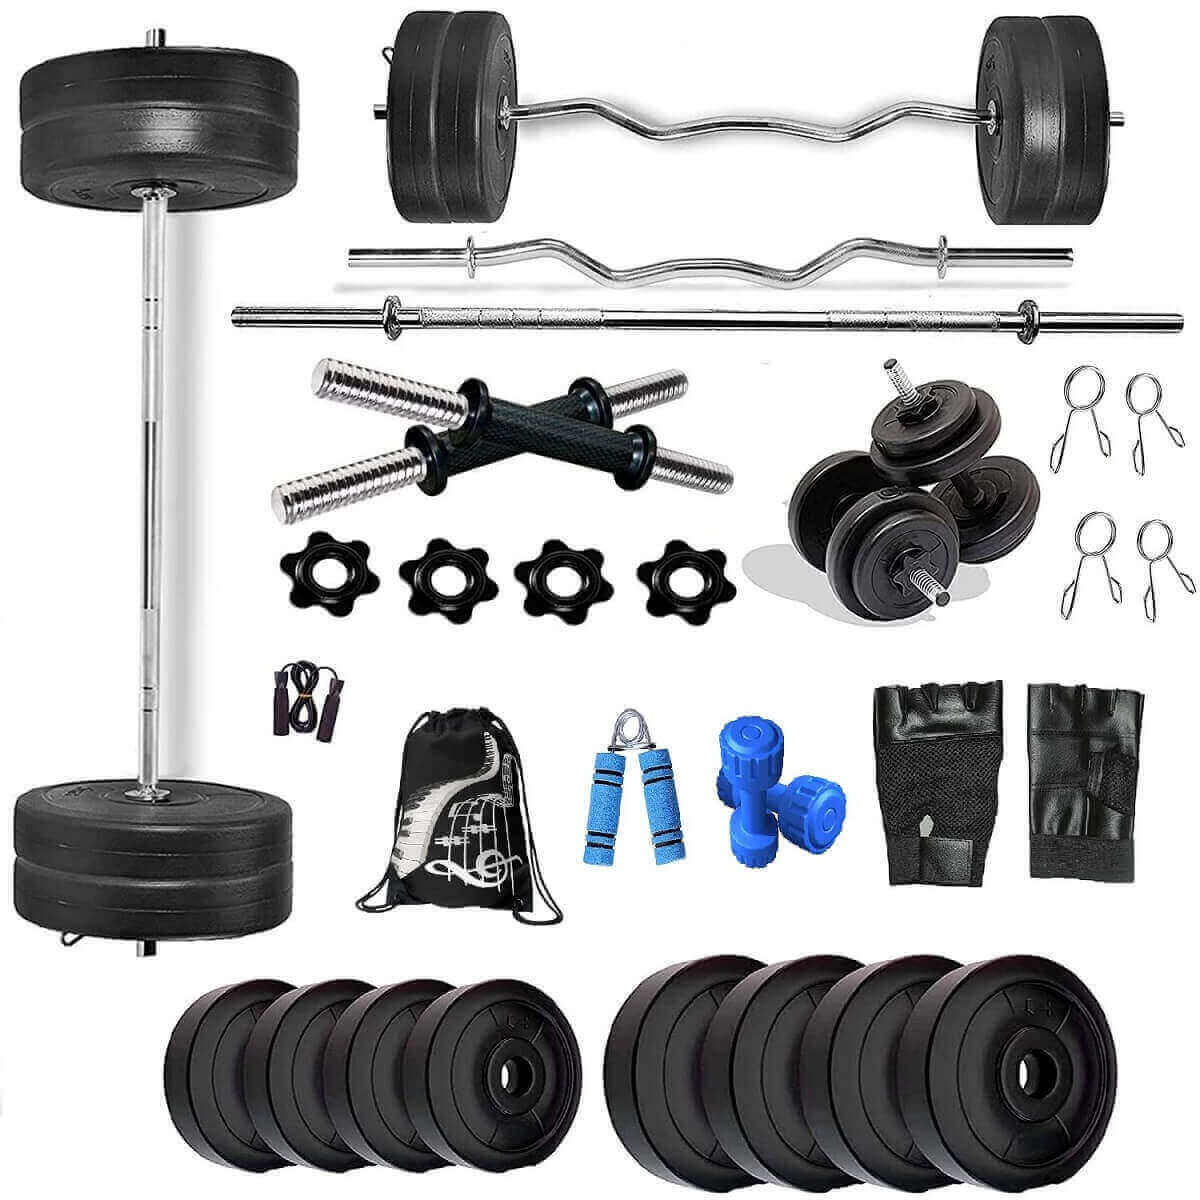 Bodyfit Home Gym Set 8 Kg to 100 Kg with Straight and Curl Rod +